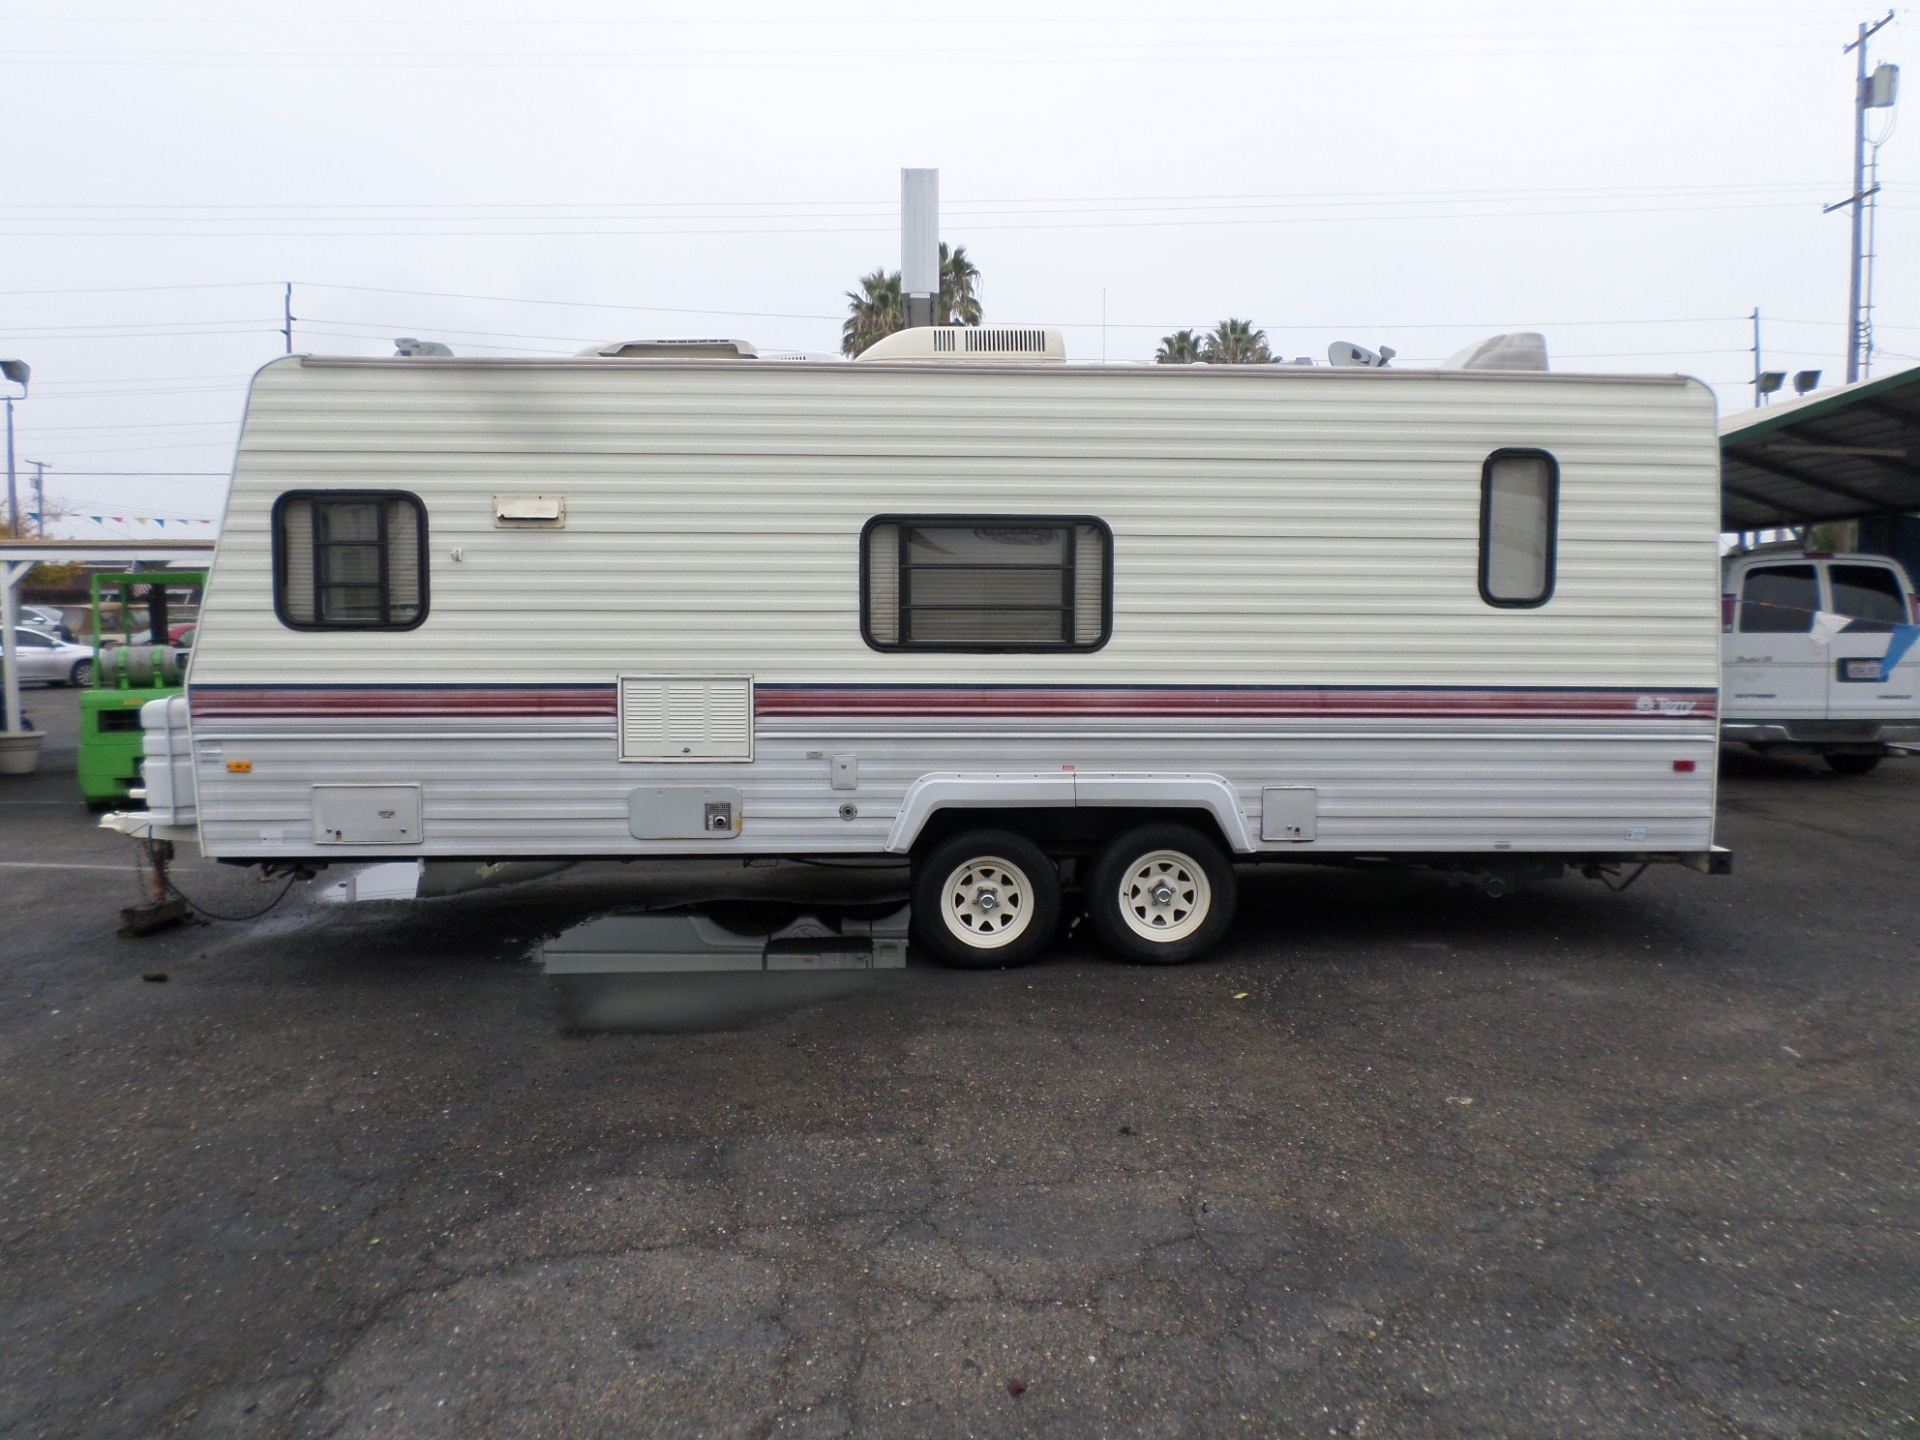 RV for sale 1996 Terry 24C Pull Travel Trailer in Lodi